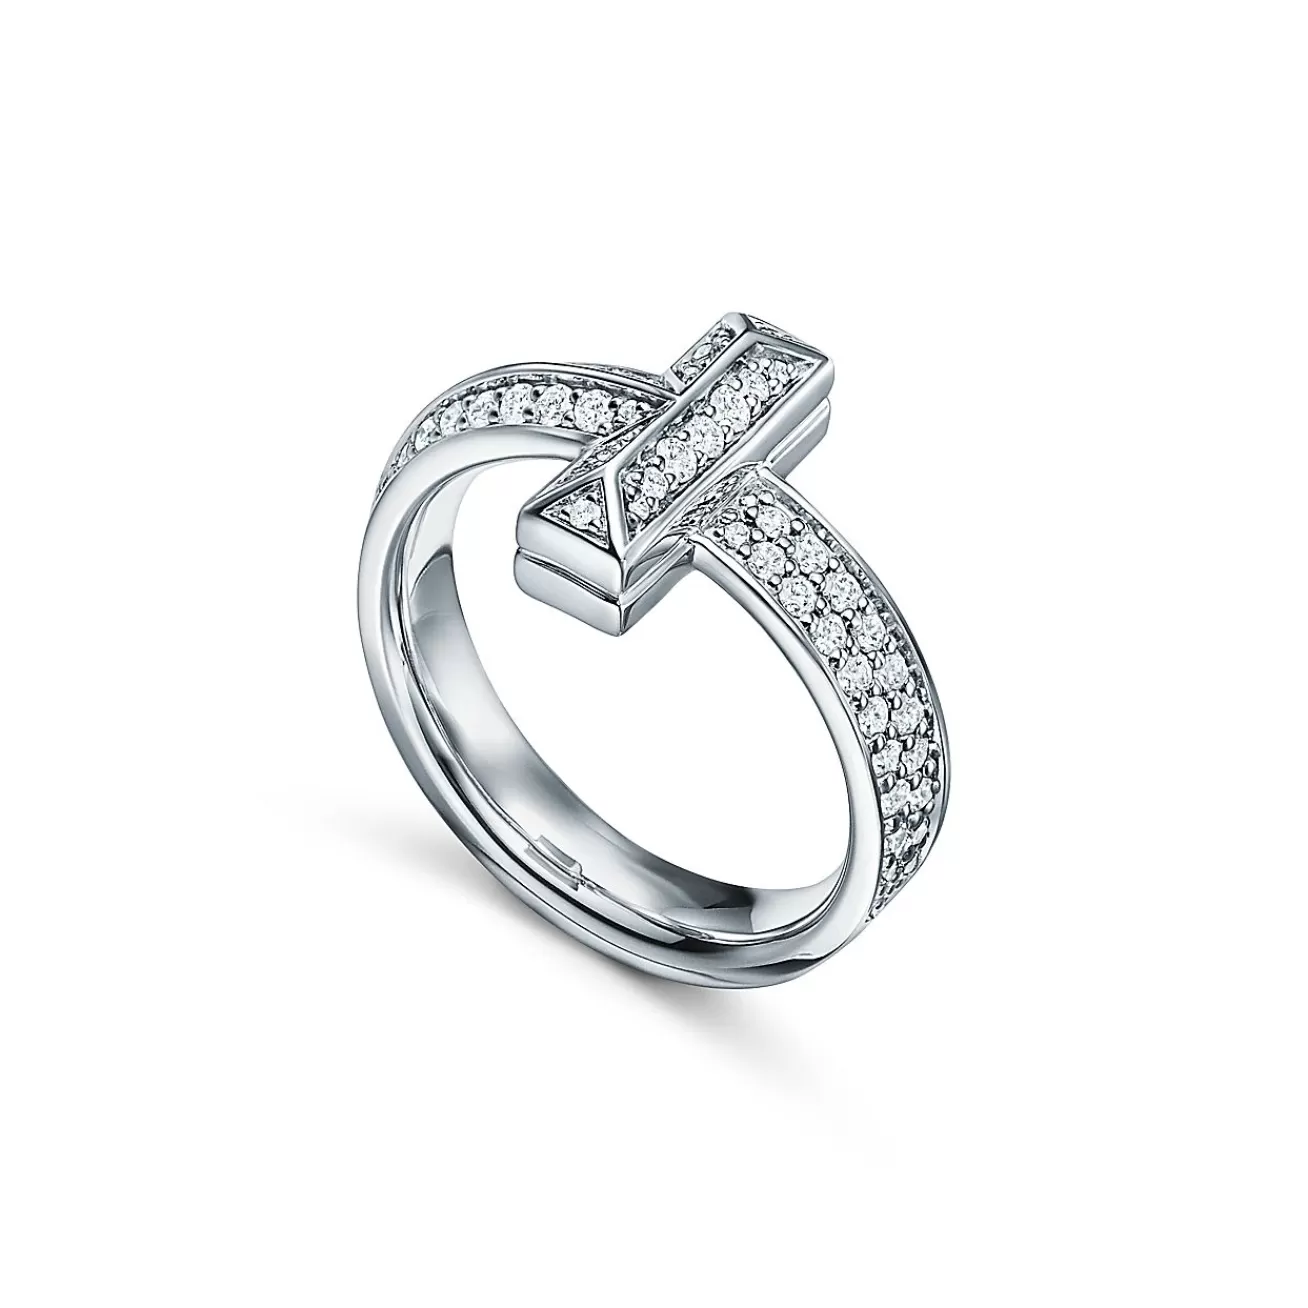 Tiffany & Co. Tiffany T T1 Ring in White Gold with Diamonds, 4.5 mm Wide | ^ Rings | Men's Jewelry